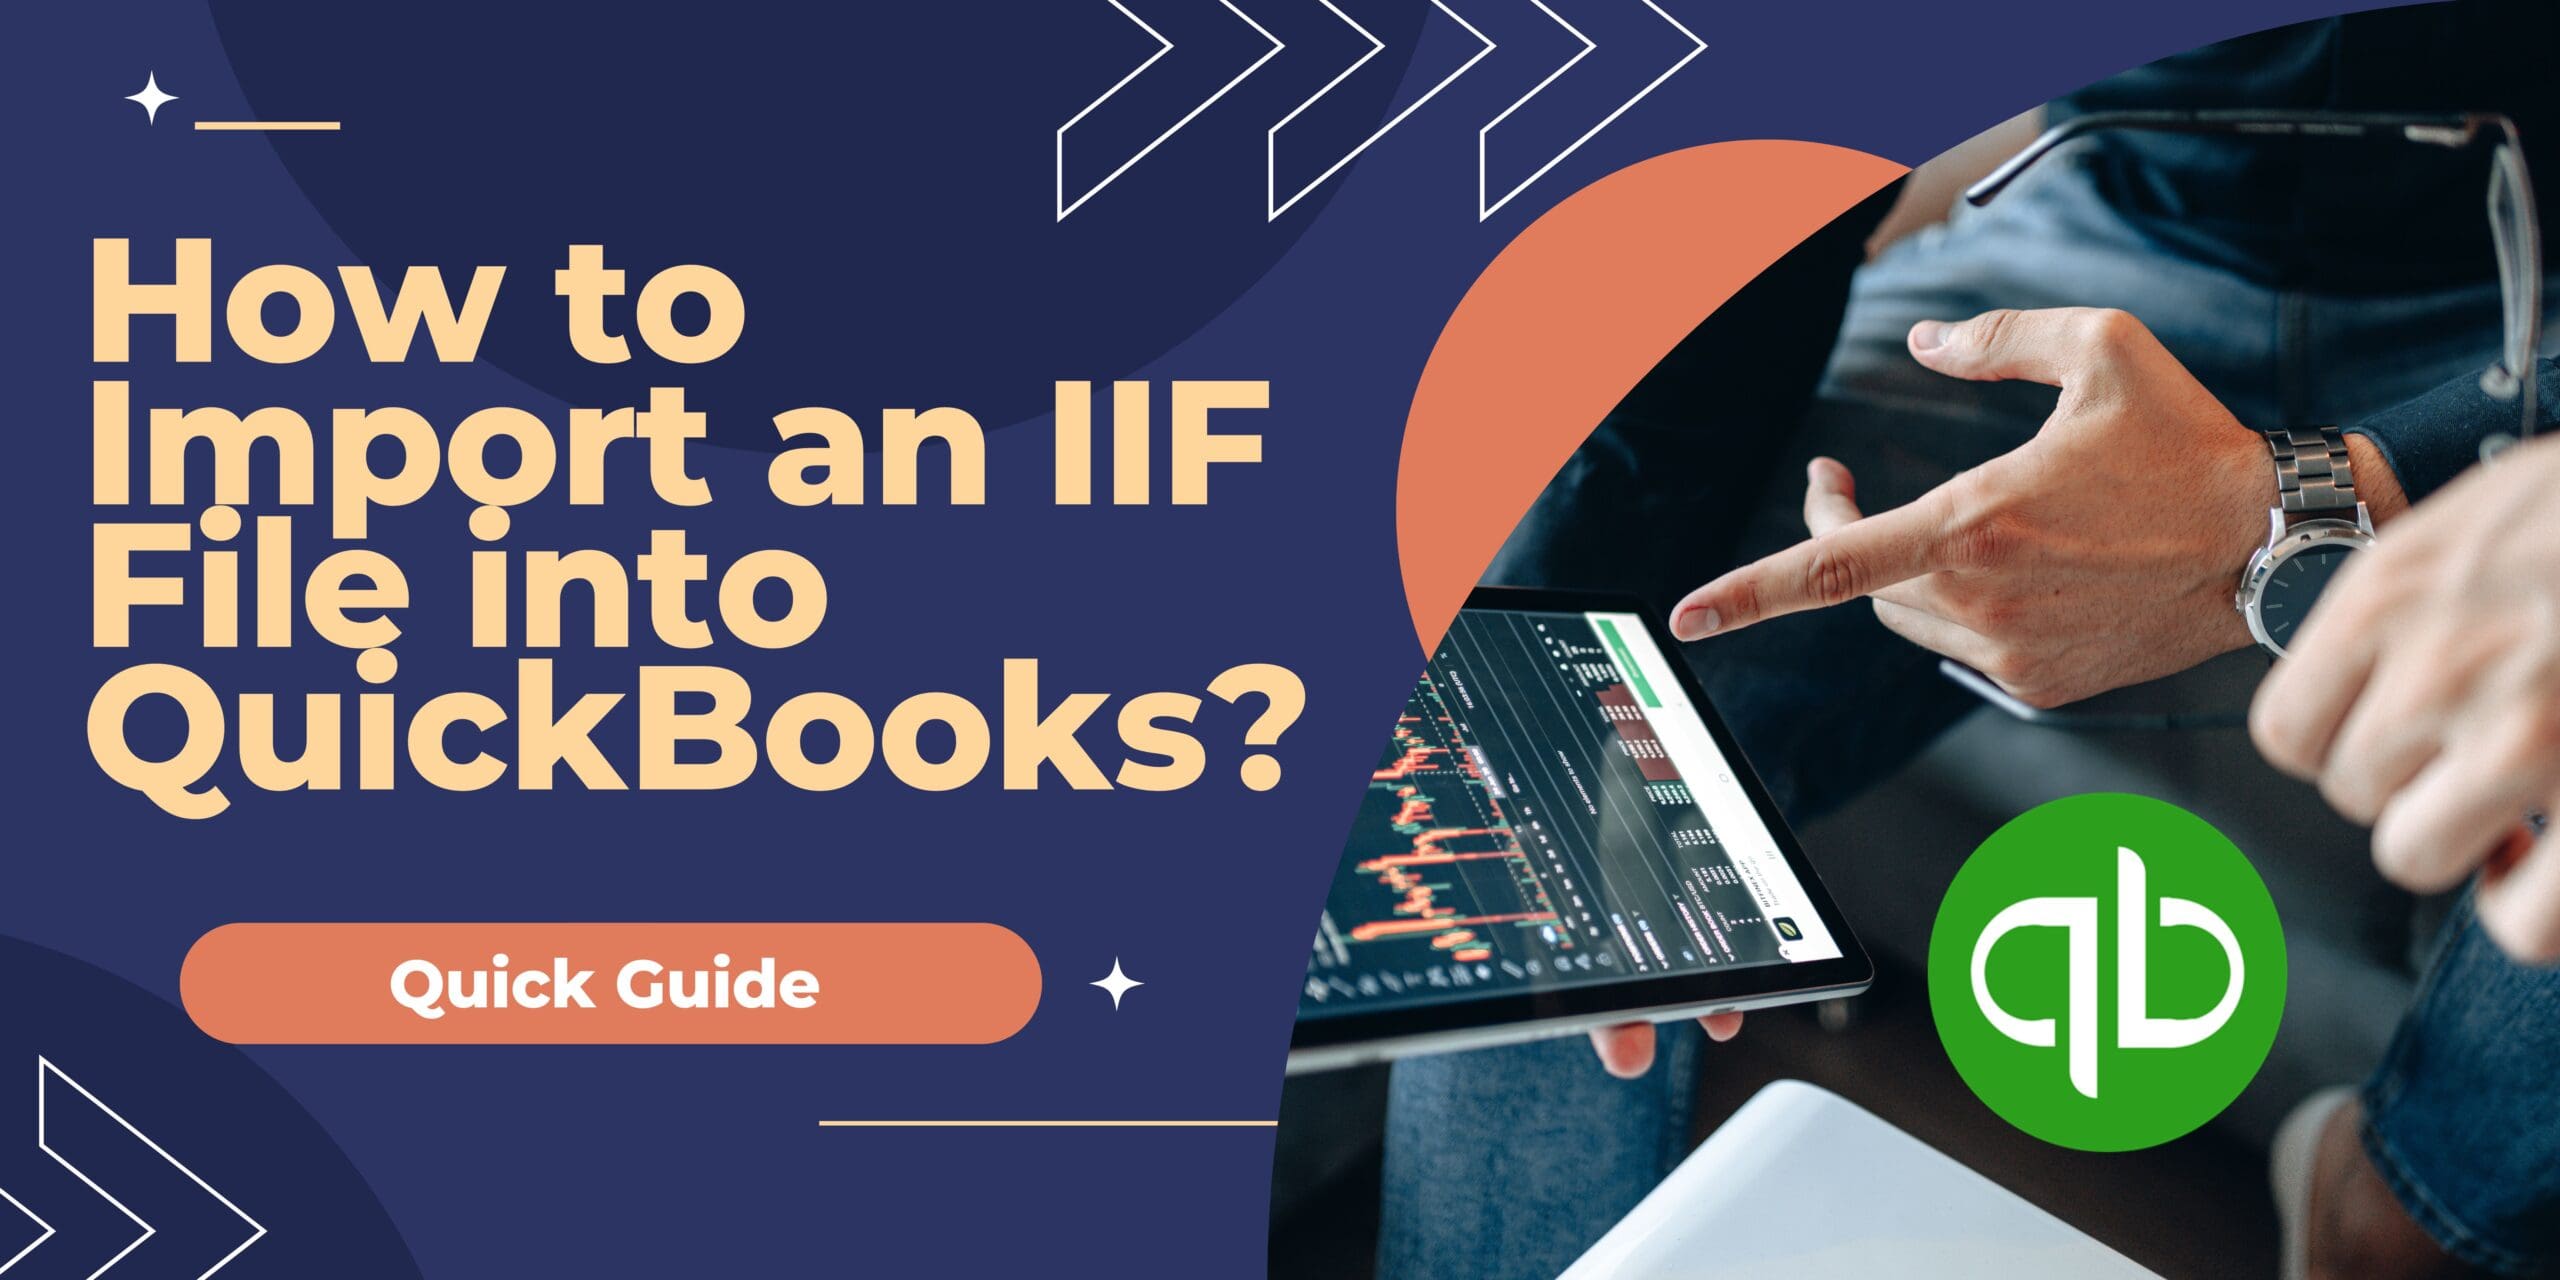 How to Import an IIF File into QuickBooks?